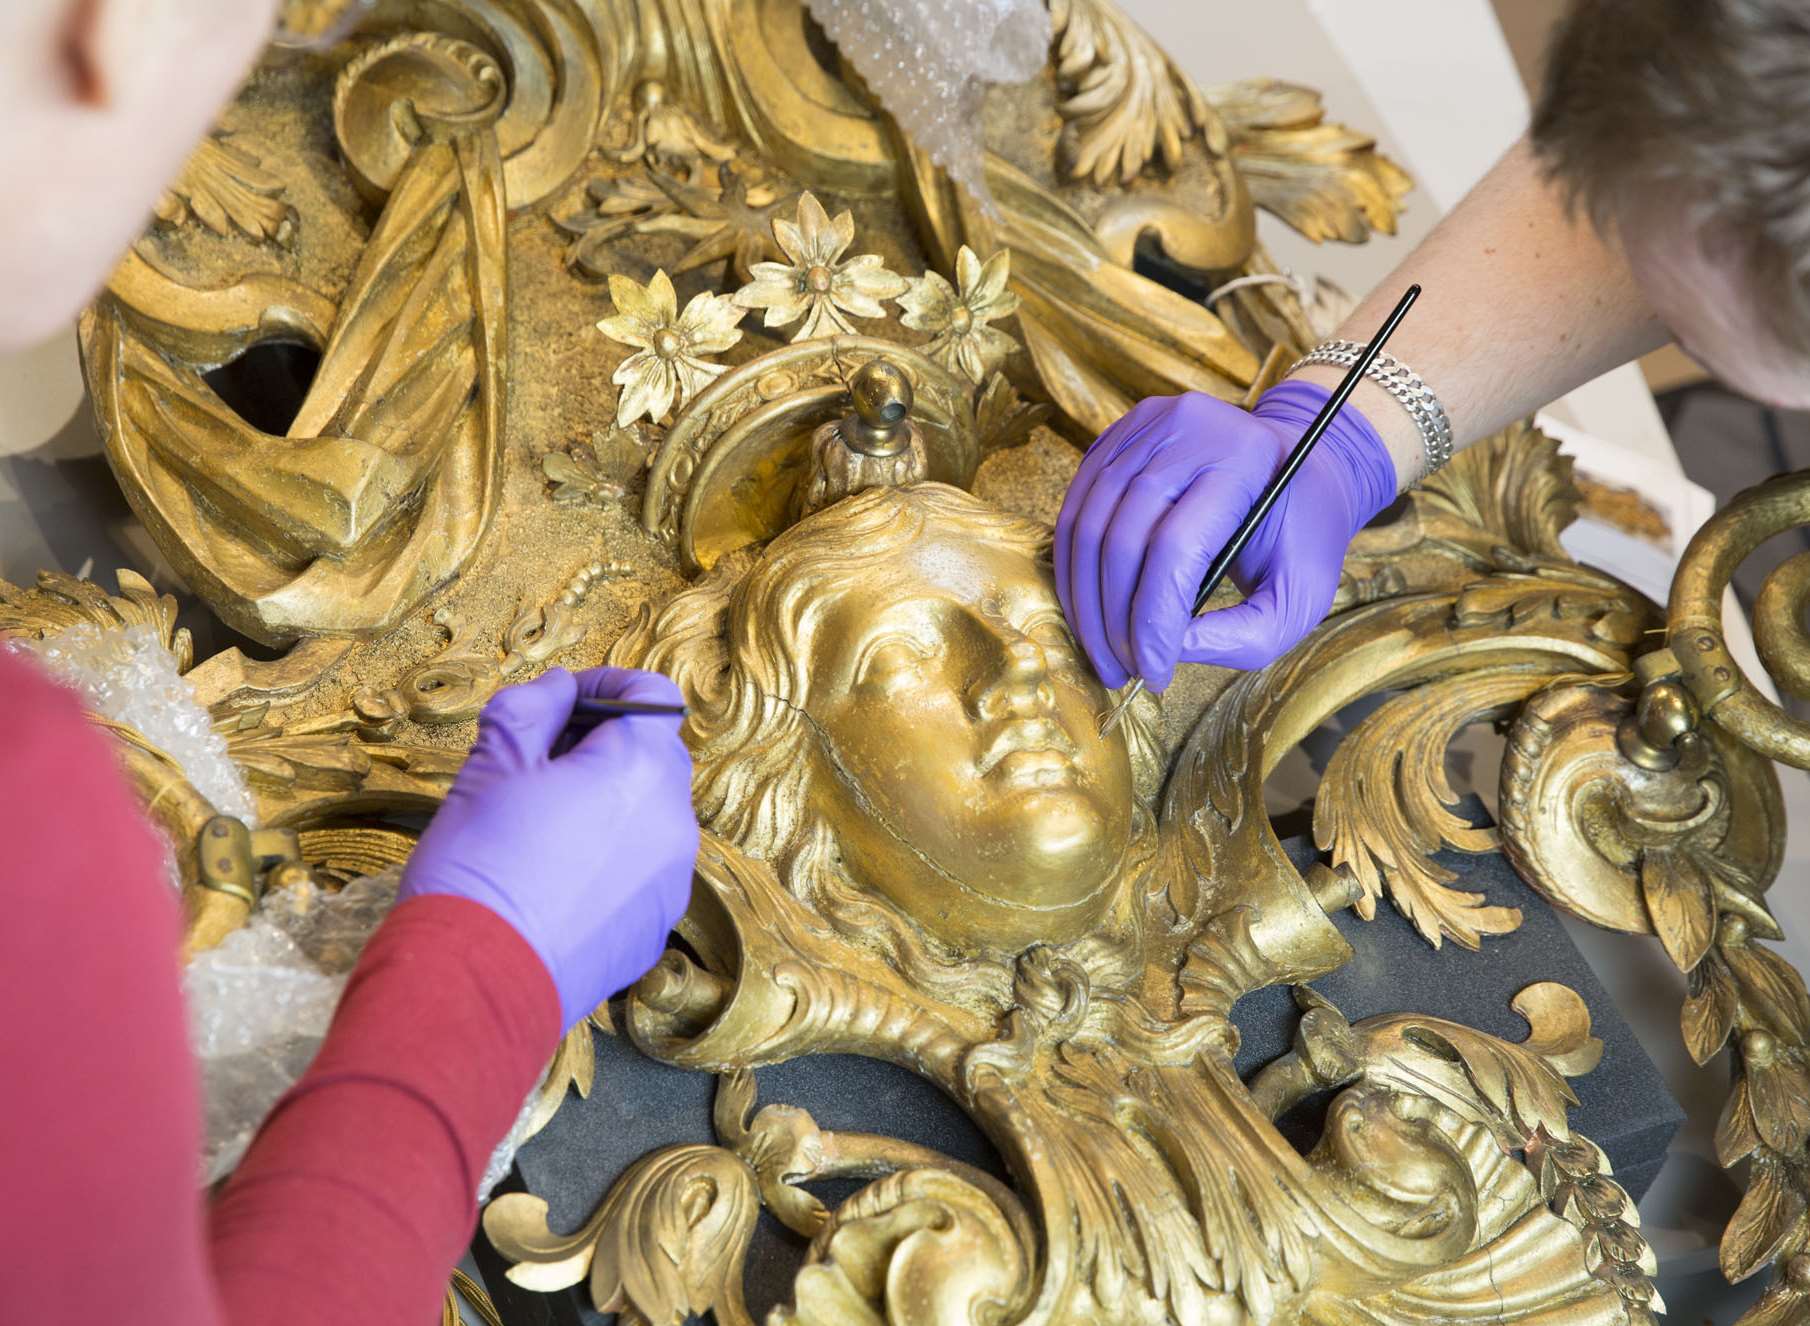 18th century William Kent designed, carved and gilded sconces from the Ballroom at Knole being restored. Picture: National Trust